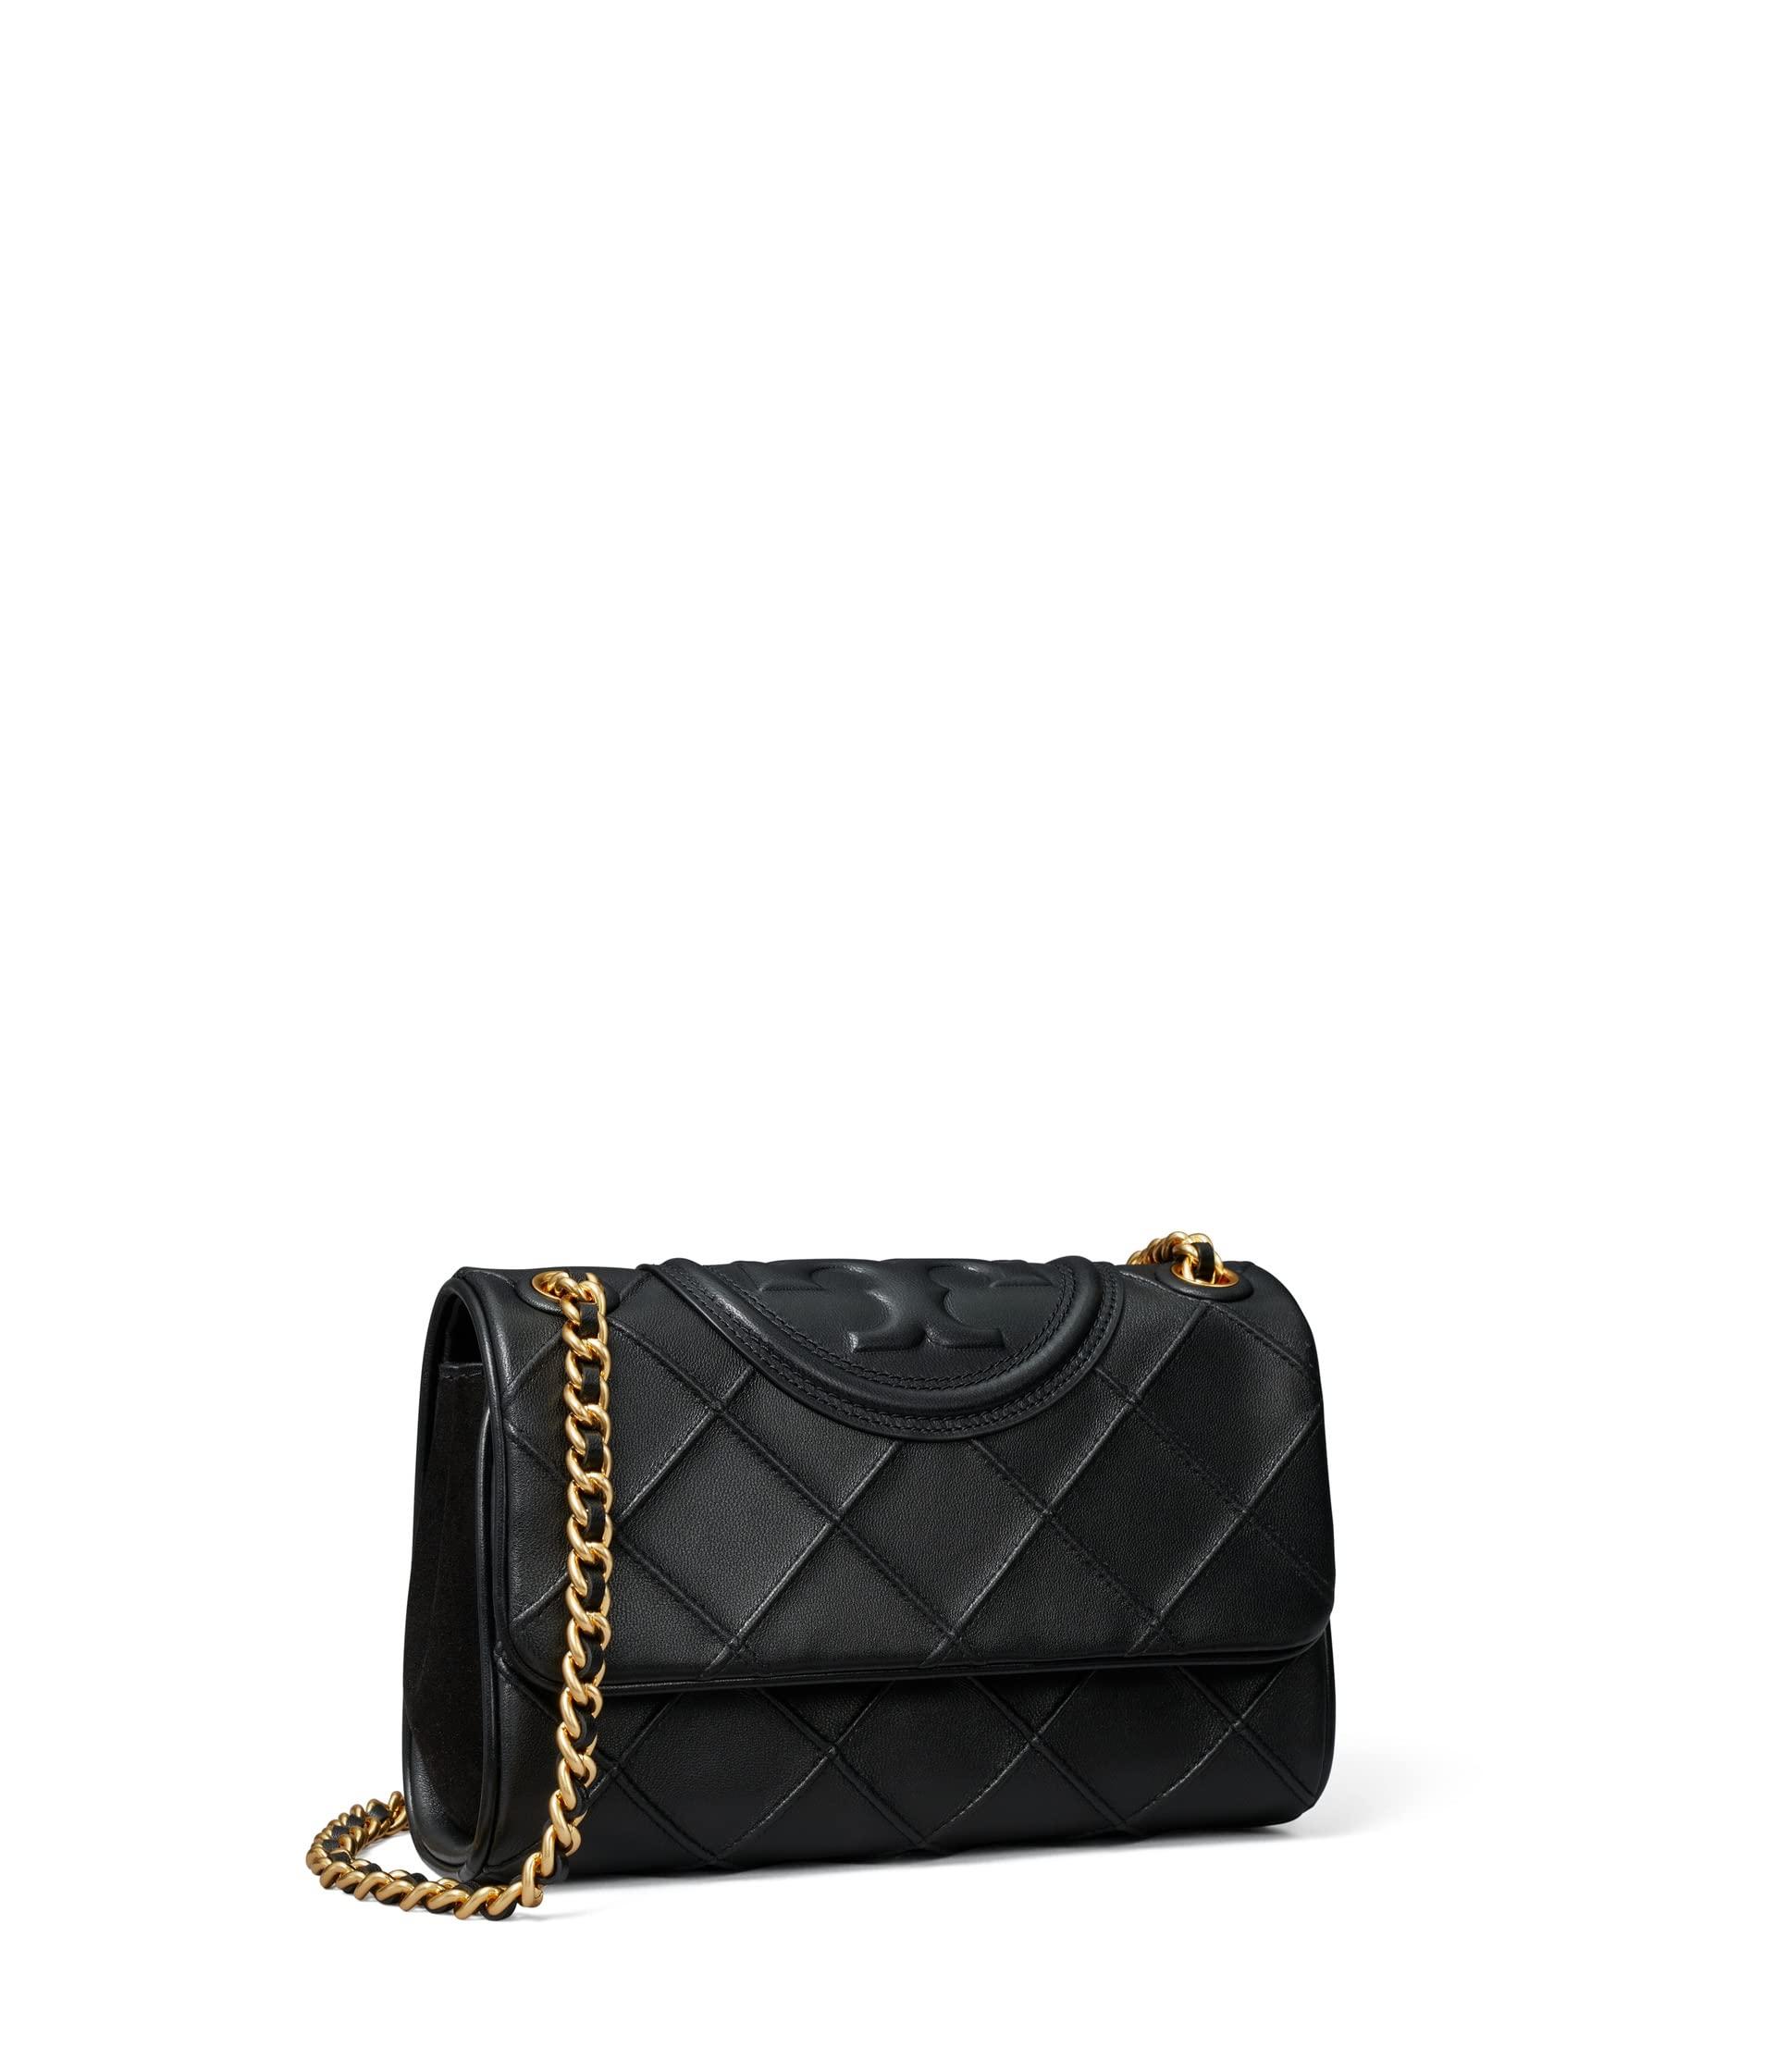 Tory Burch Fleming small convertible shoulder bag for Women - Black in UAE